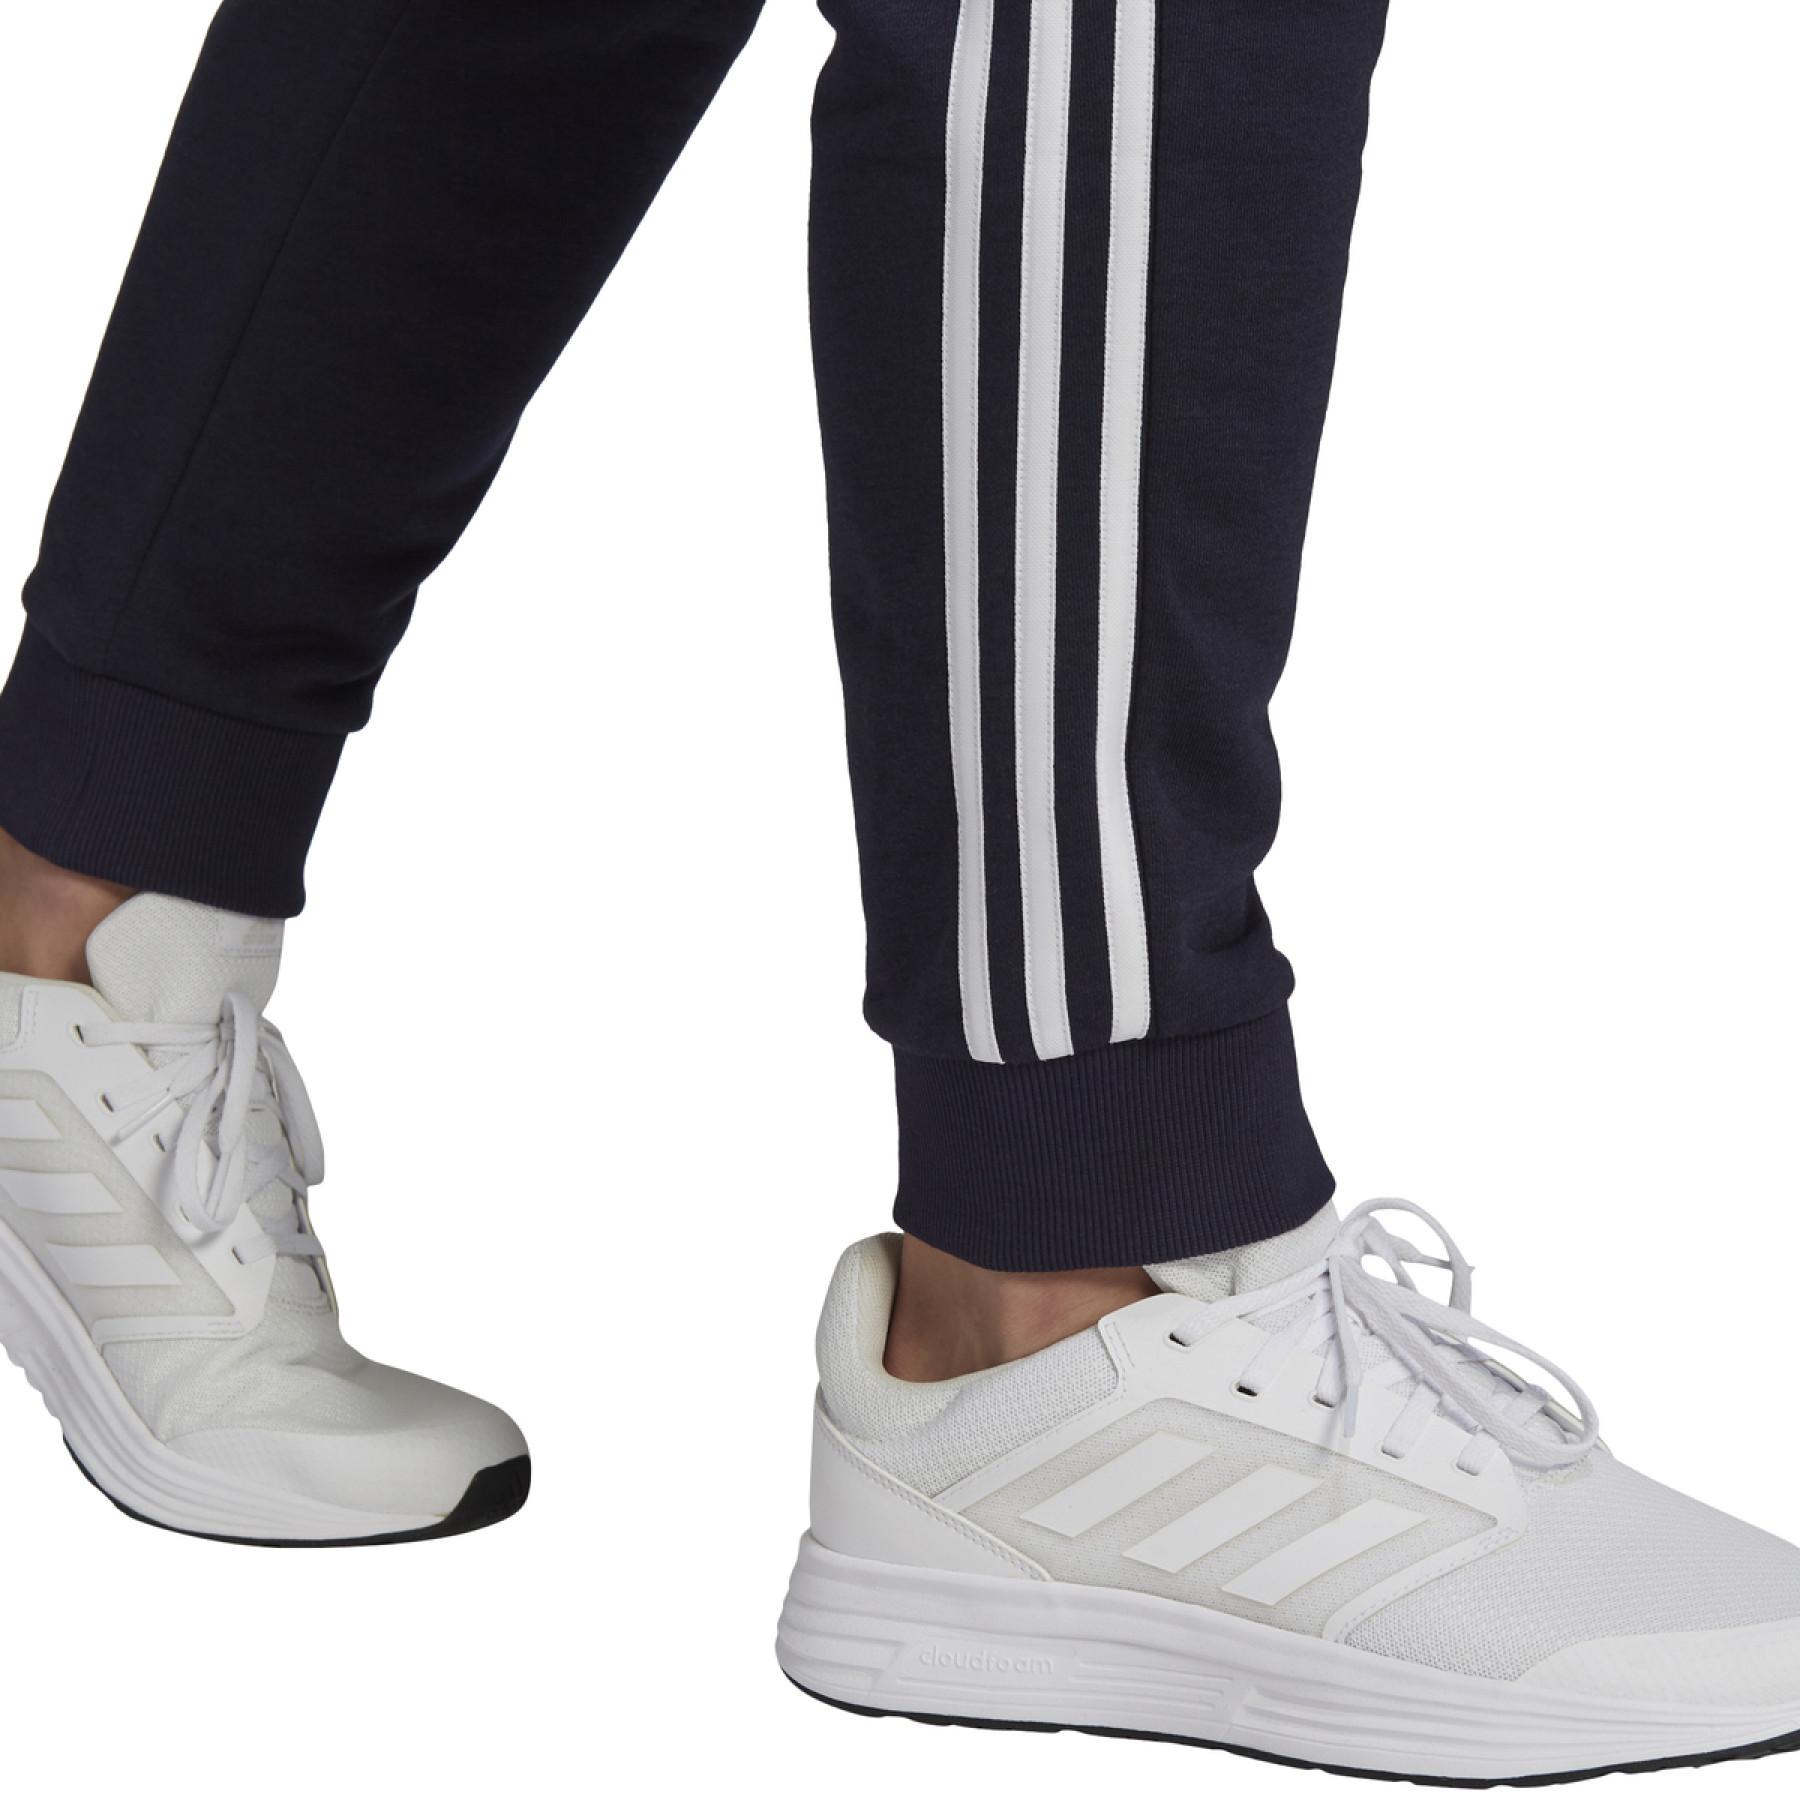 Hosen adidas Essentials French Terry Tapered Cuff 3-Bandes